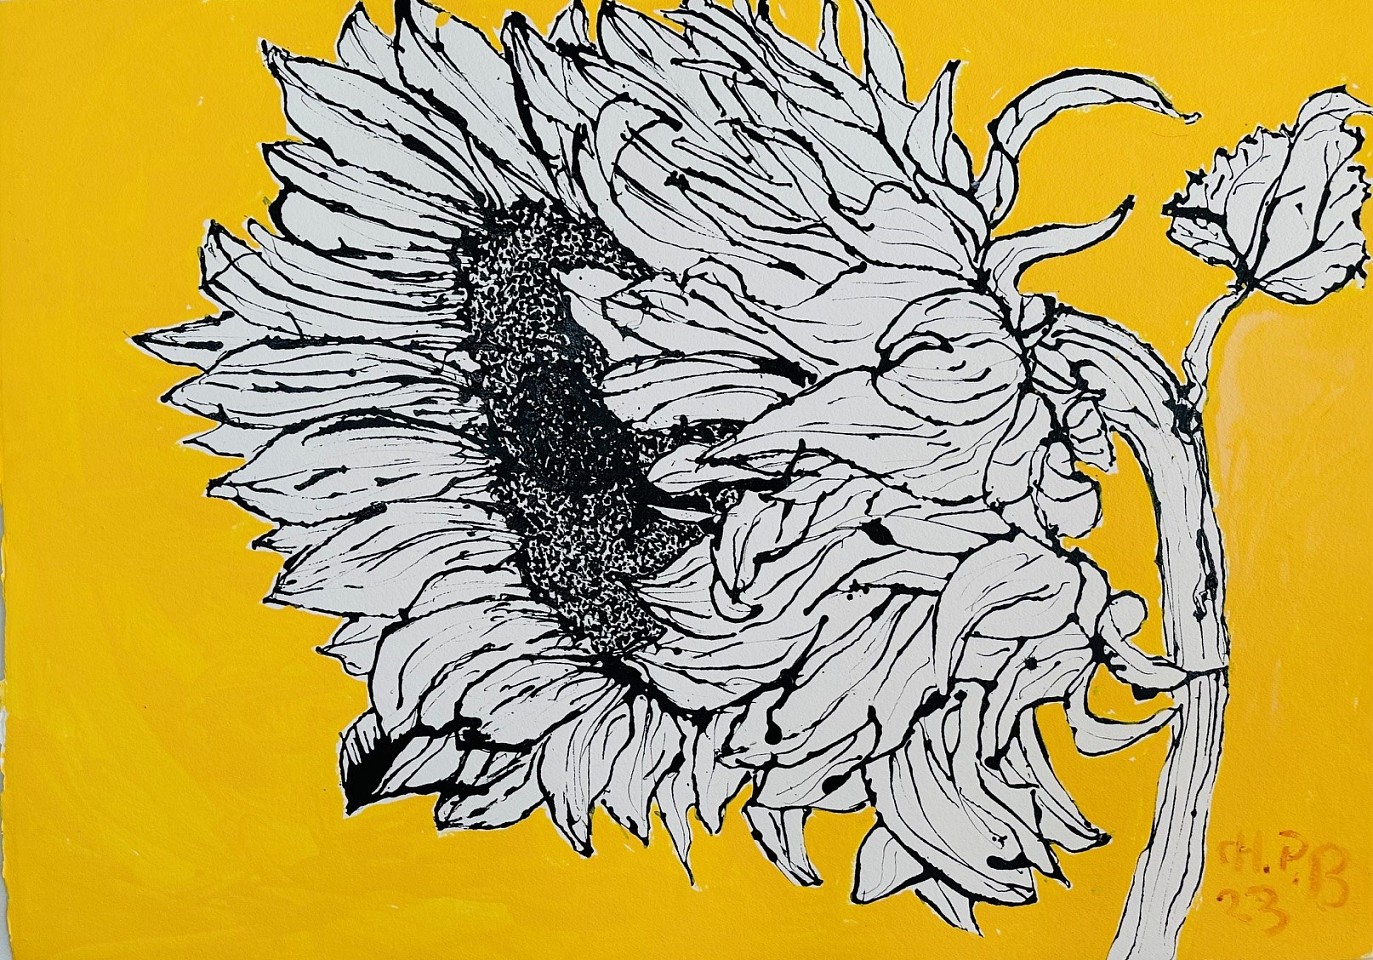 Christian Brechneff, Tiffany Farm Sunflower VII
ink and oil on handmade paper, 29"" x 42""
CB 0324.29
$4,200